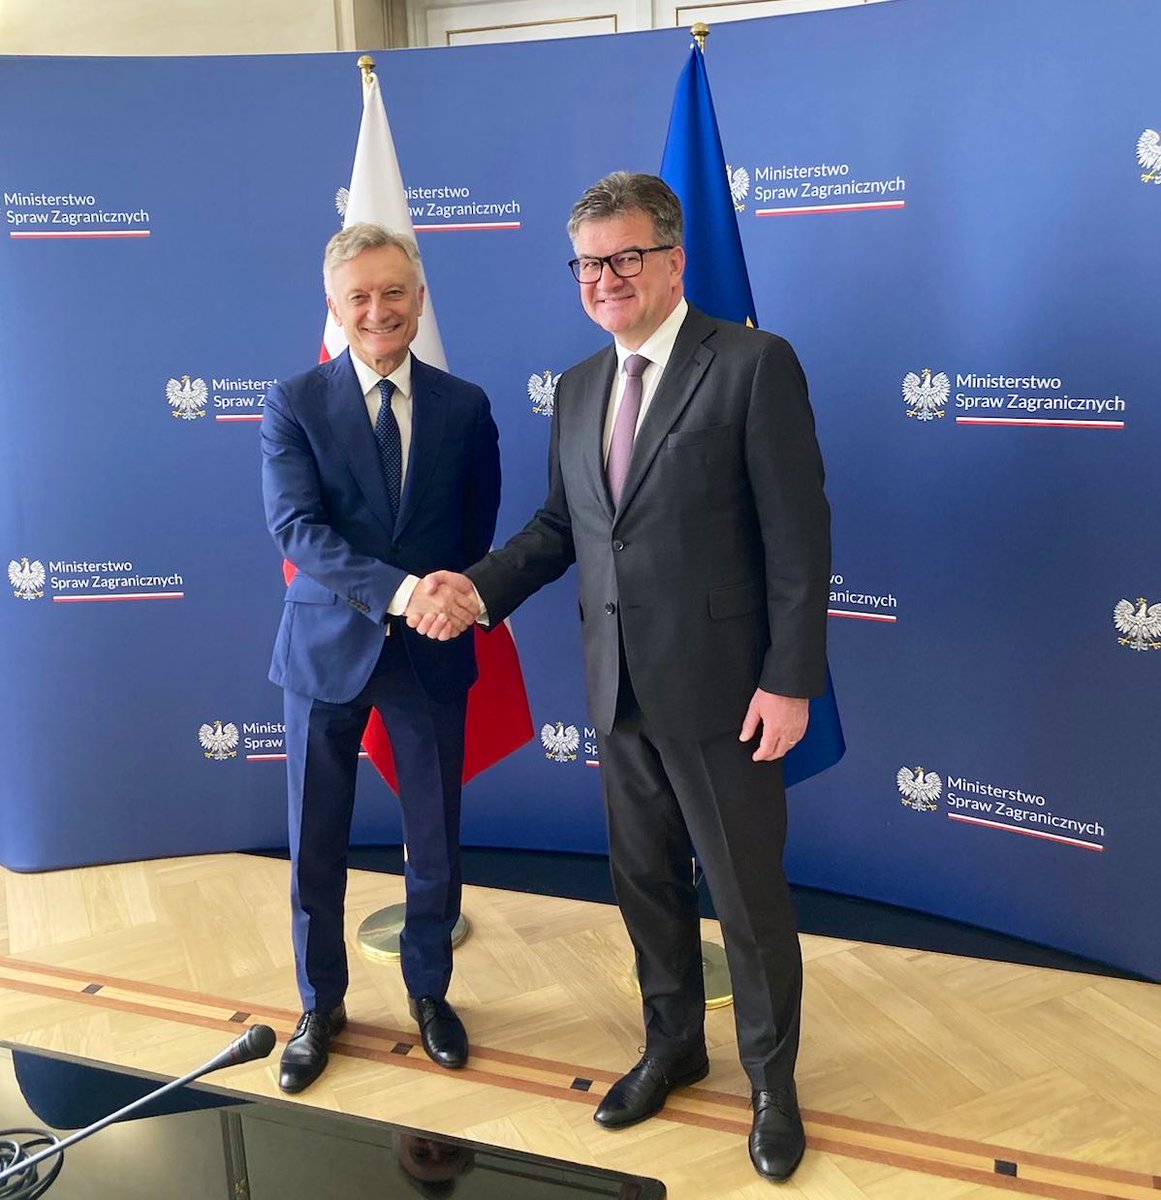 Had an excellent meeting with 🇵🇱 Undersecretary of State Marek Prawda in Warsaw. Gave an overview of the latest developments in the region and an update on the state of play in the Dialogue. Grateful for Poland’s interest in the Western Balkans and support to our 🇪🇺 efforts.